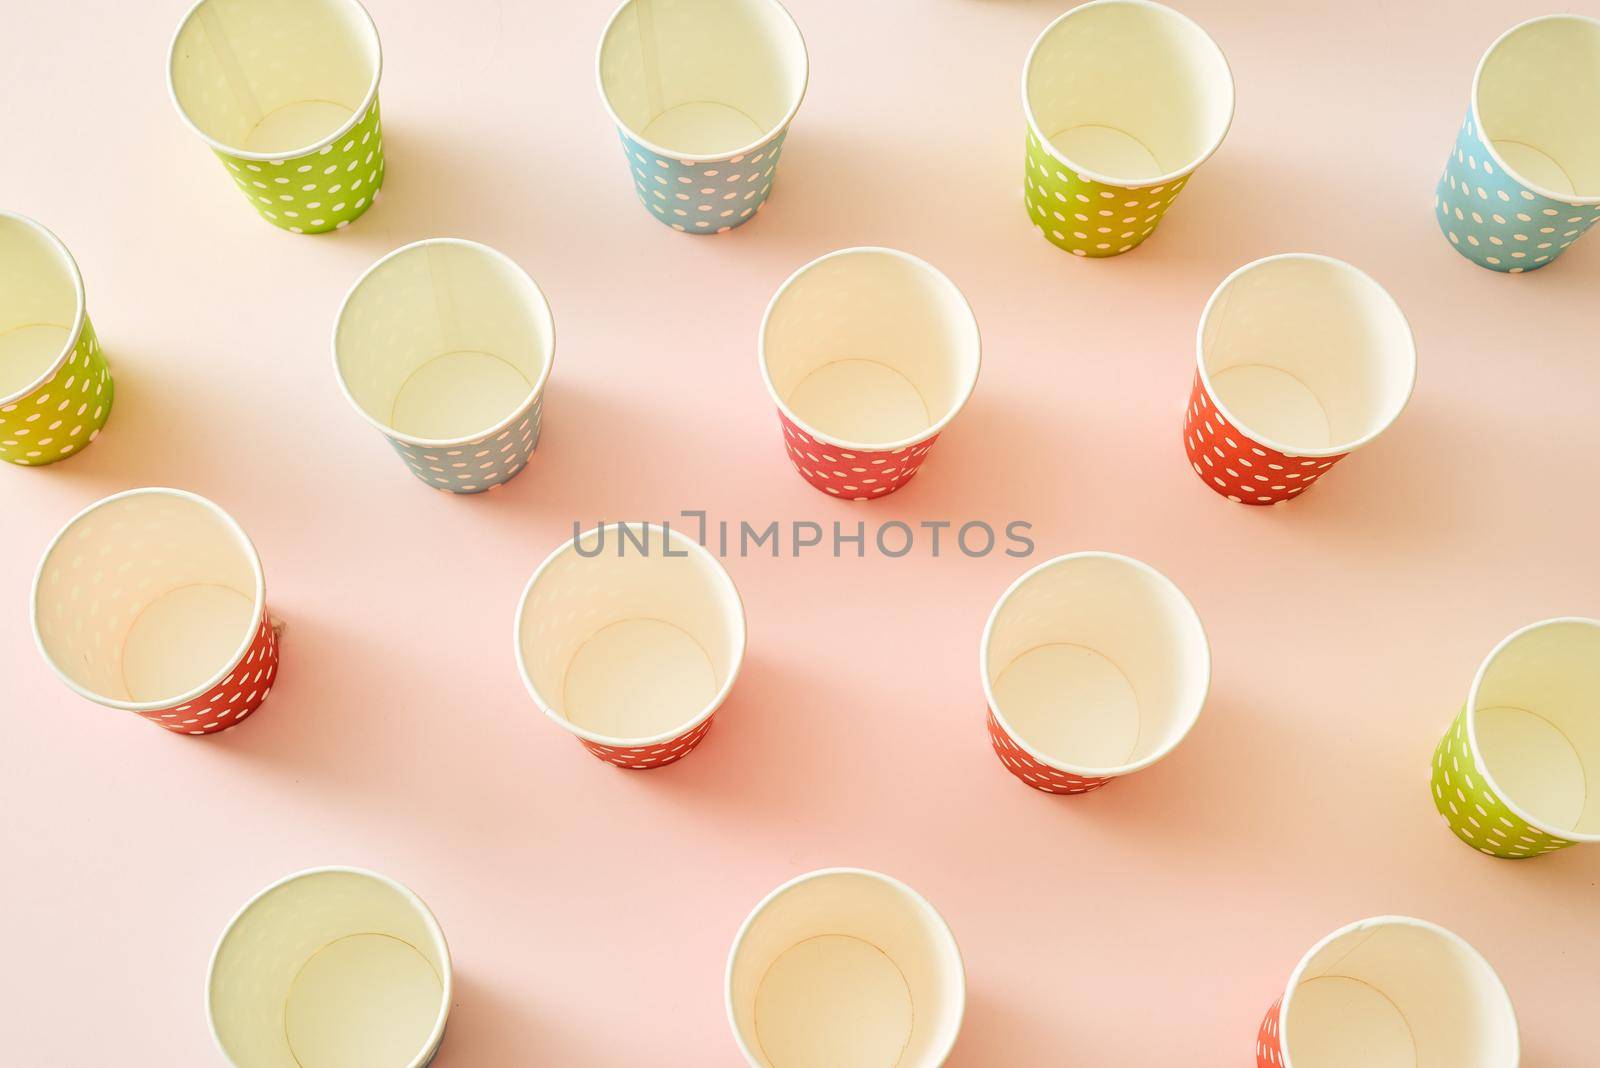 paper fashion cups on a delicate pink background